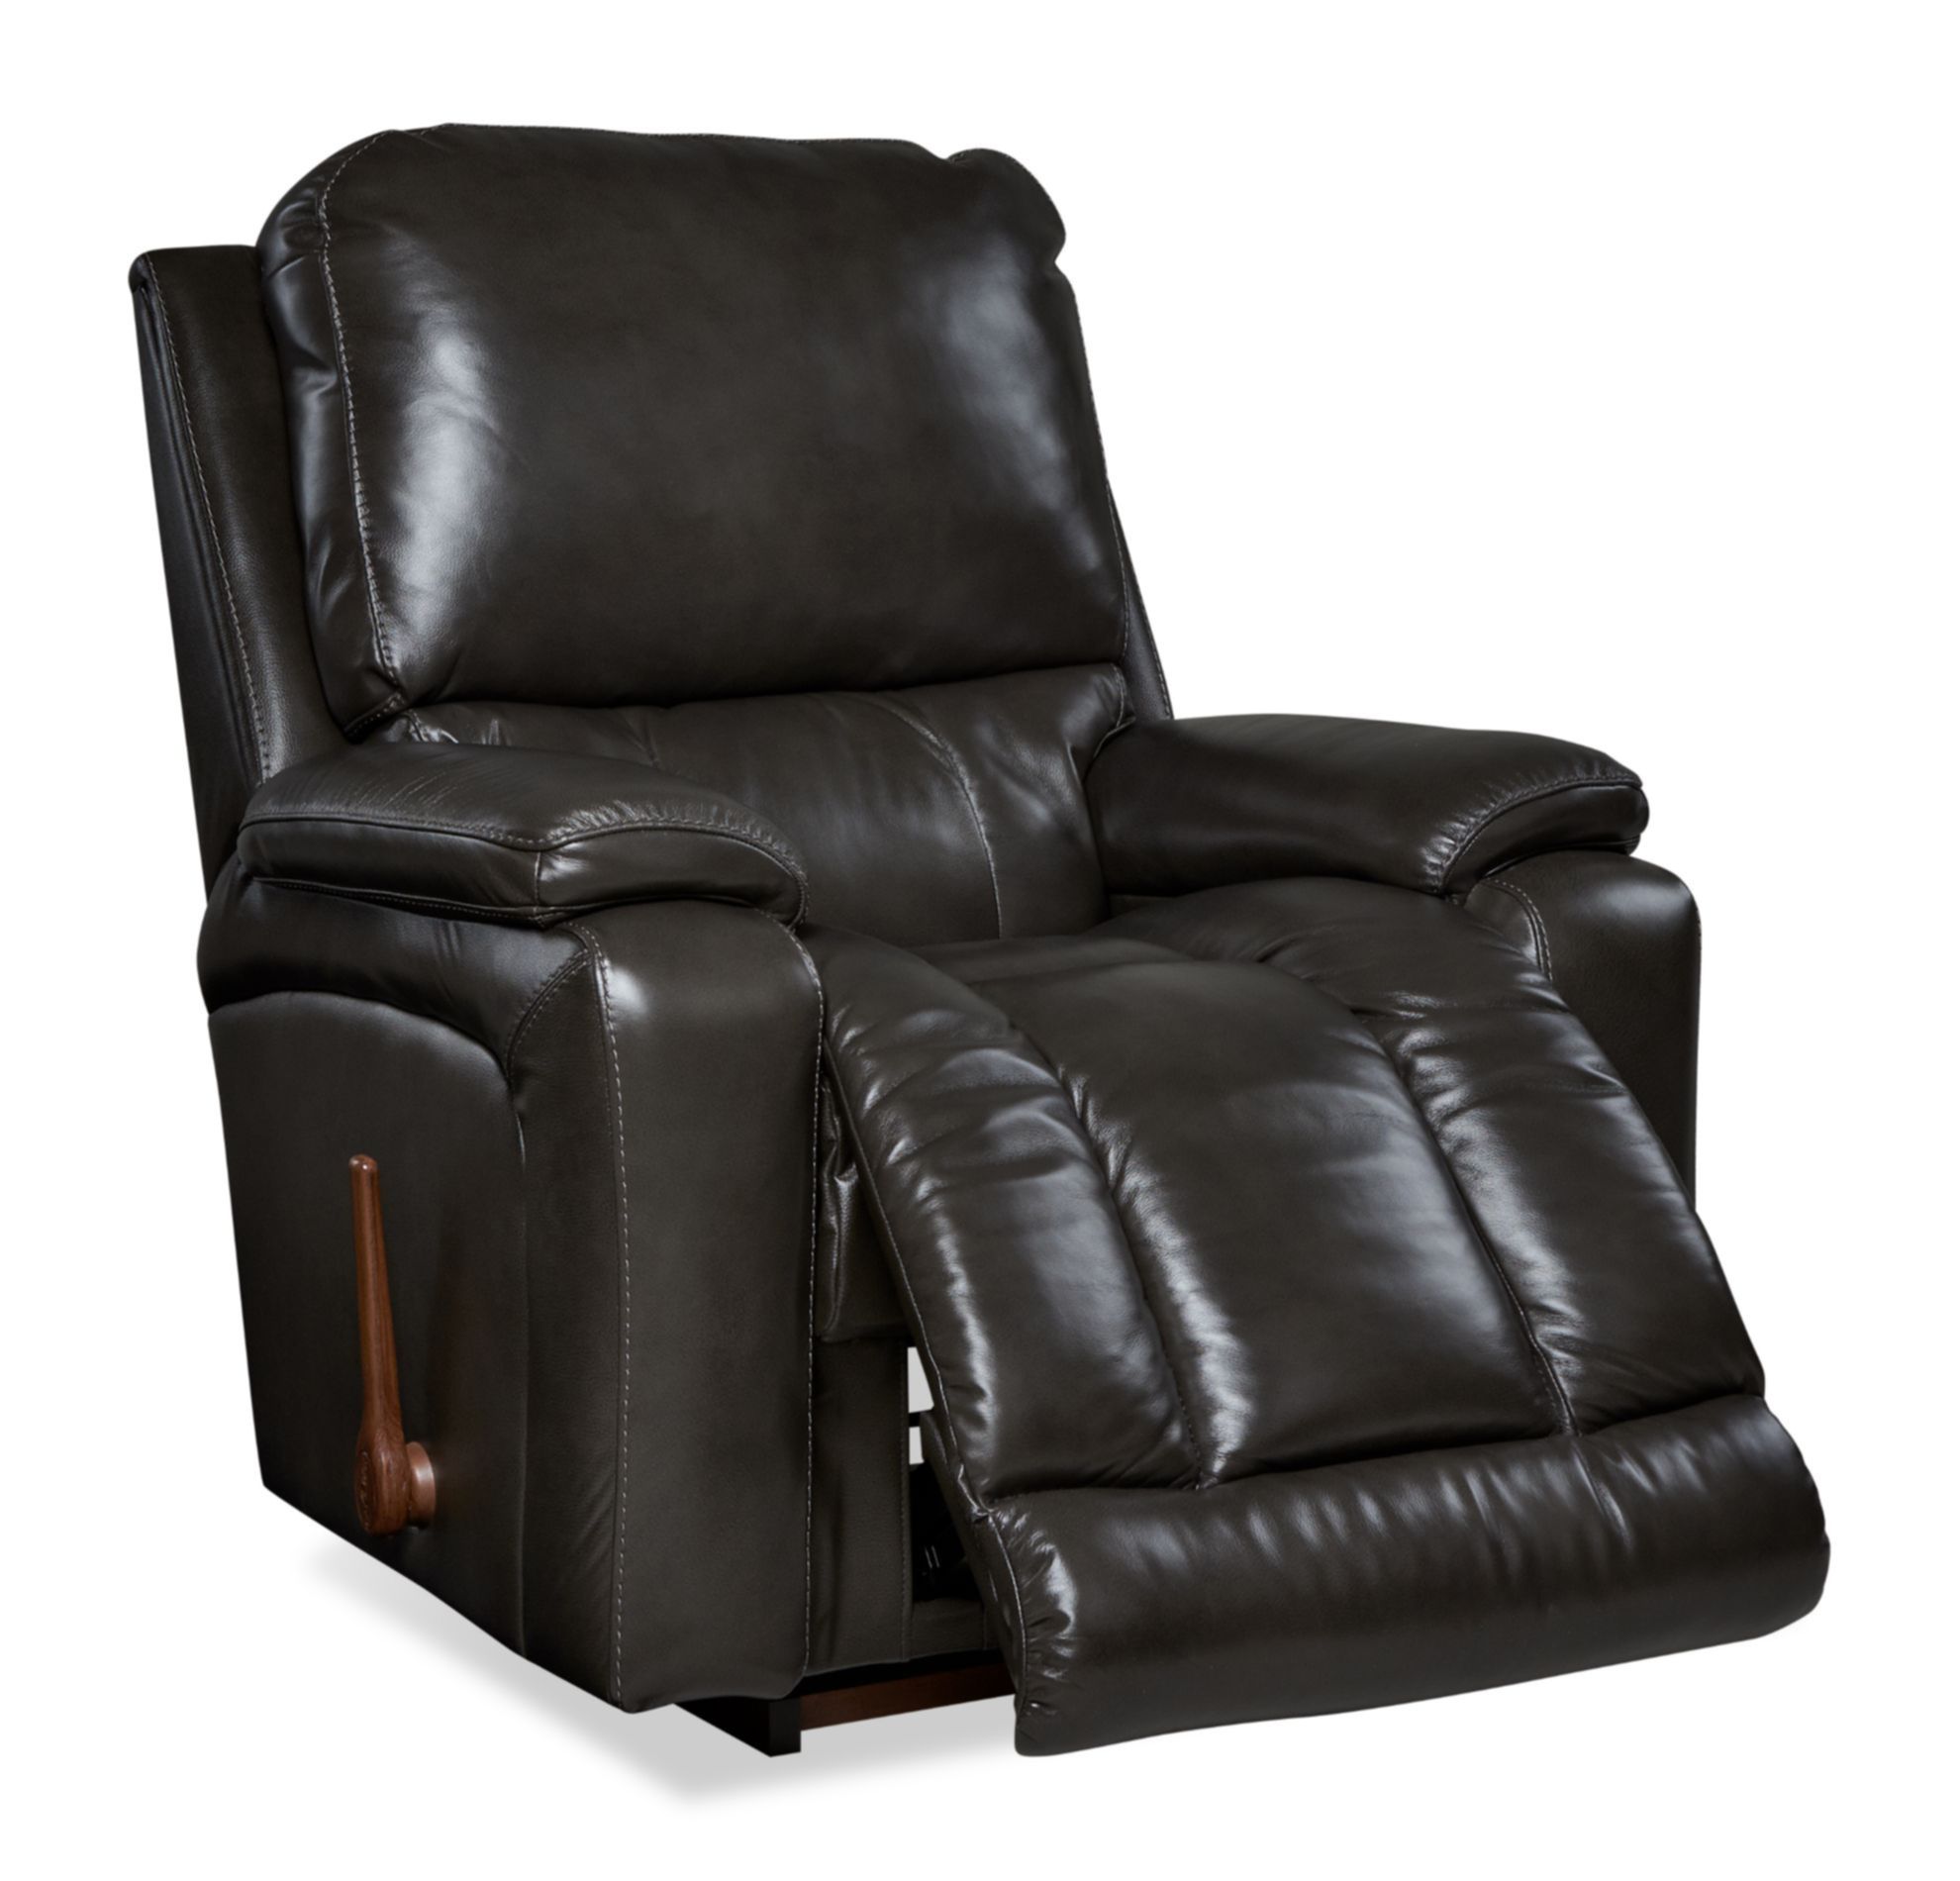 Picture of Greyson Rocker Recliner